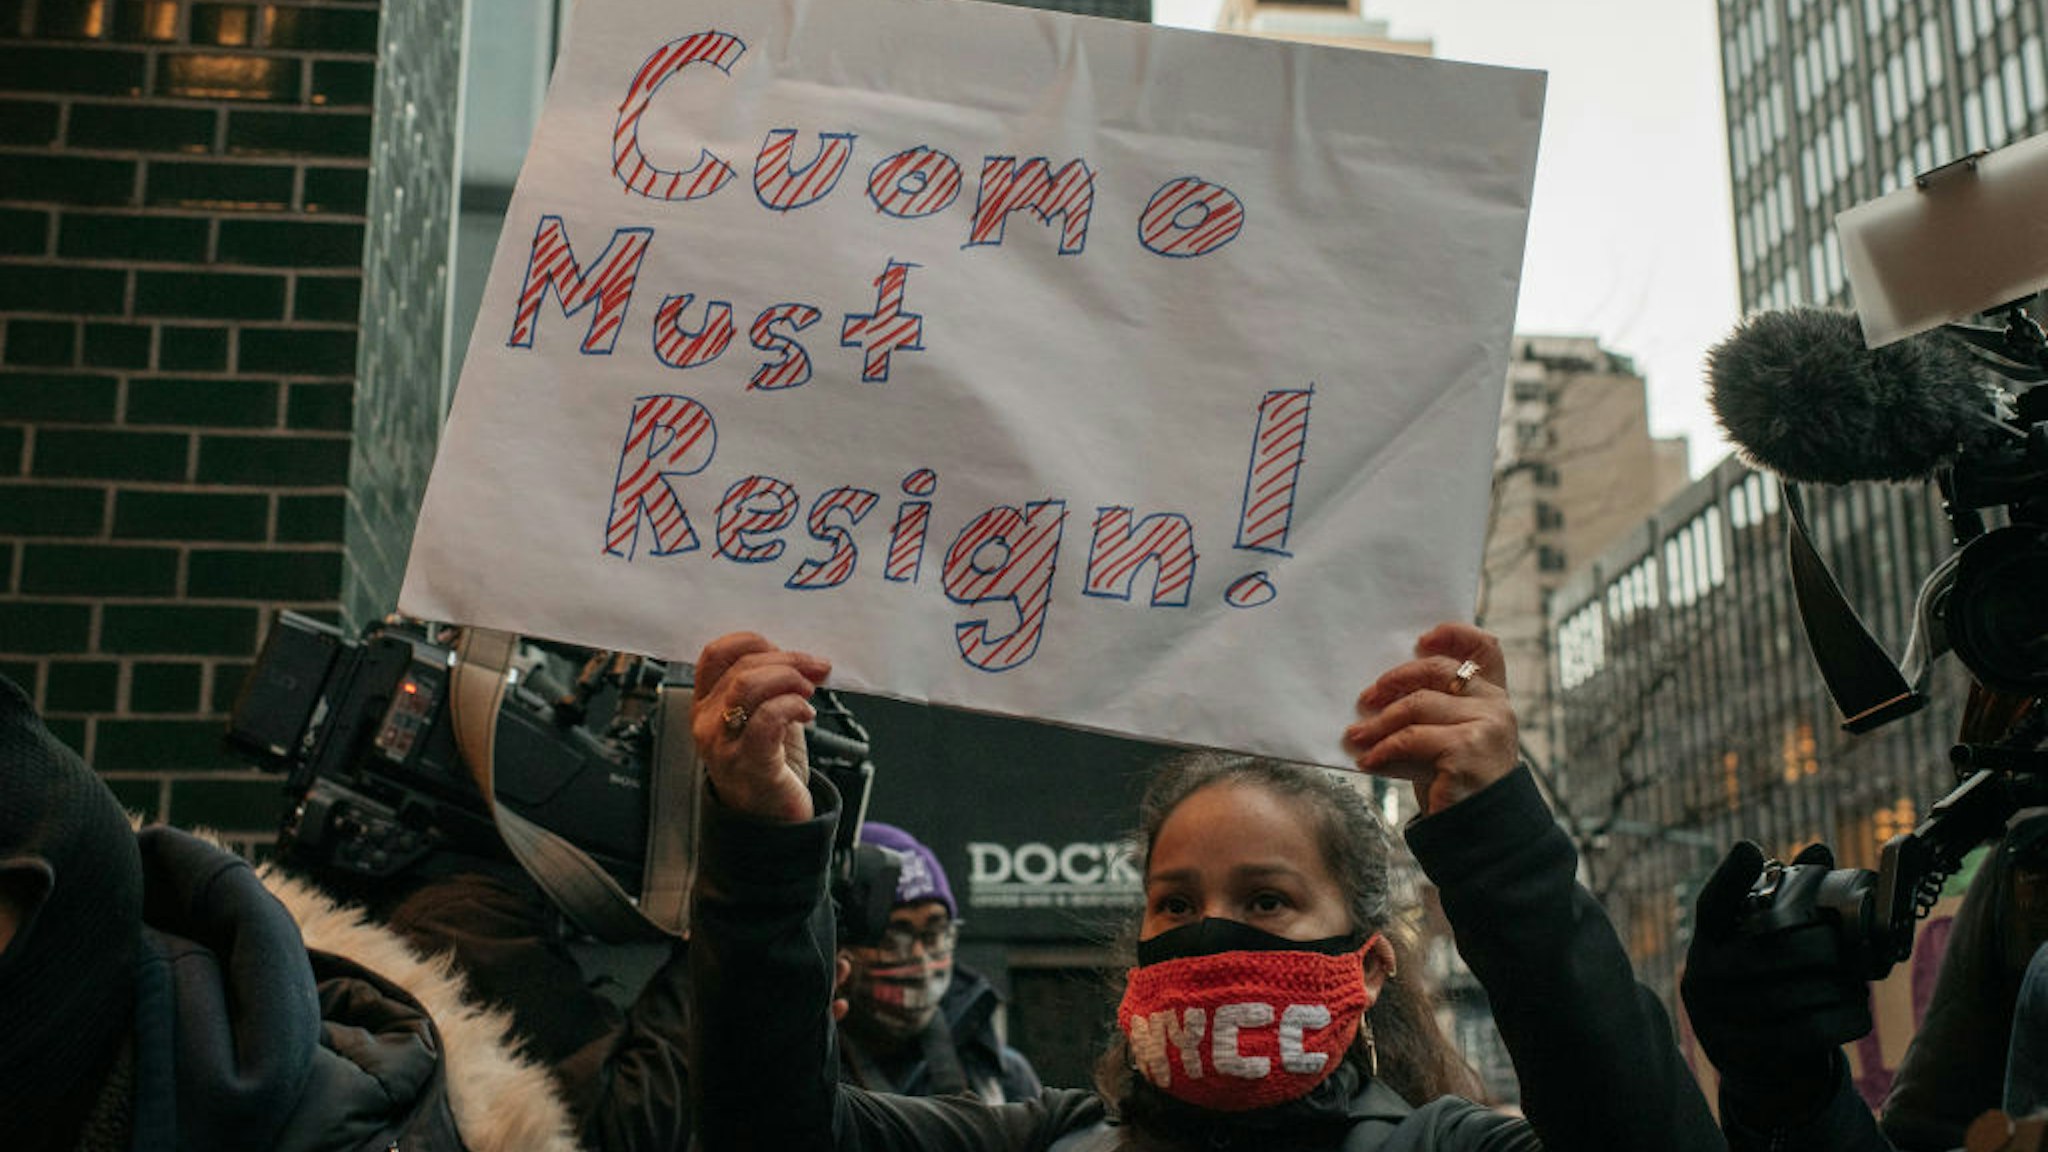 Demonstrators call on New York Gov. Andrew Cuomo to resign at a rally on March 2, 2021 in New York City.